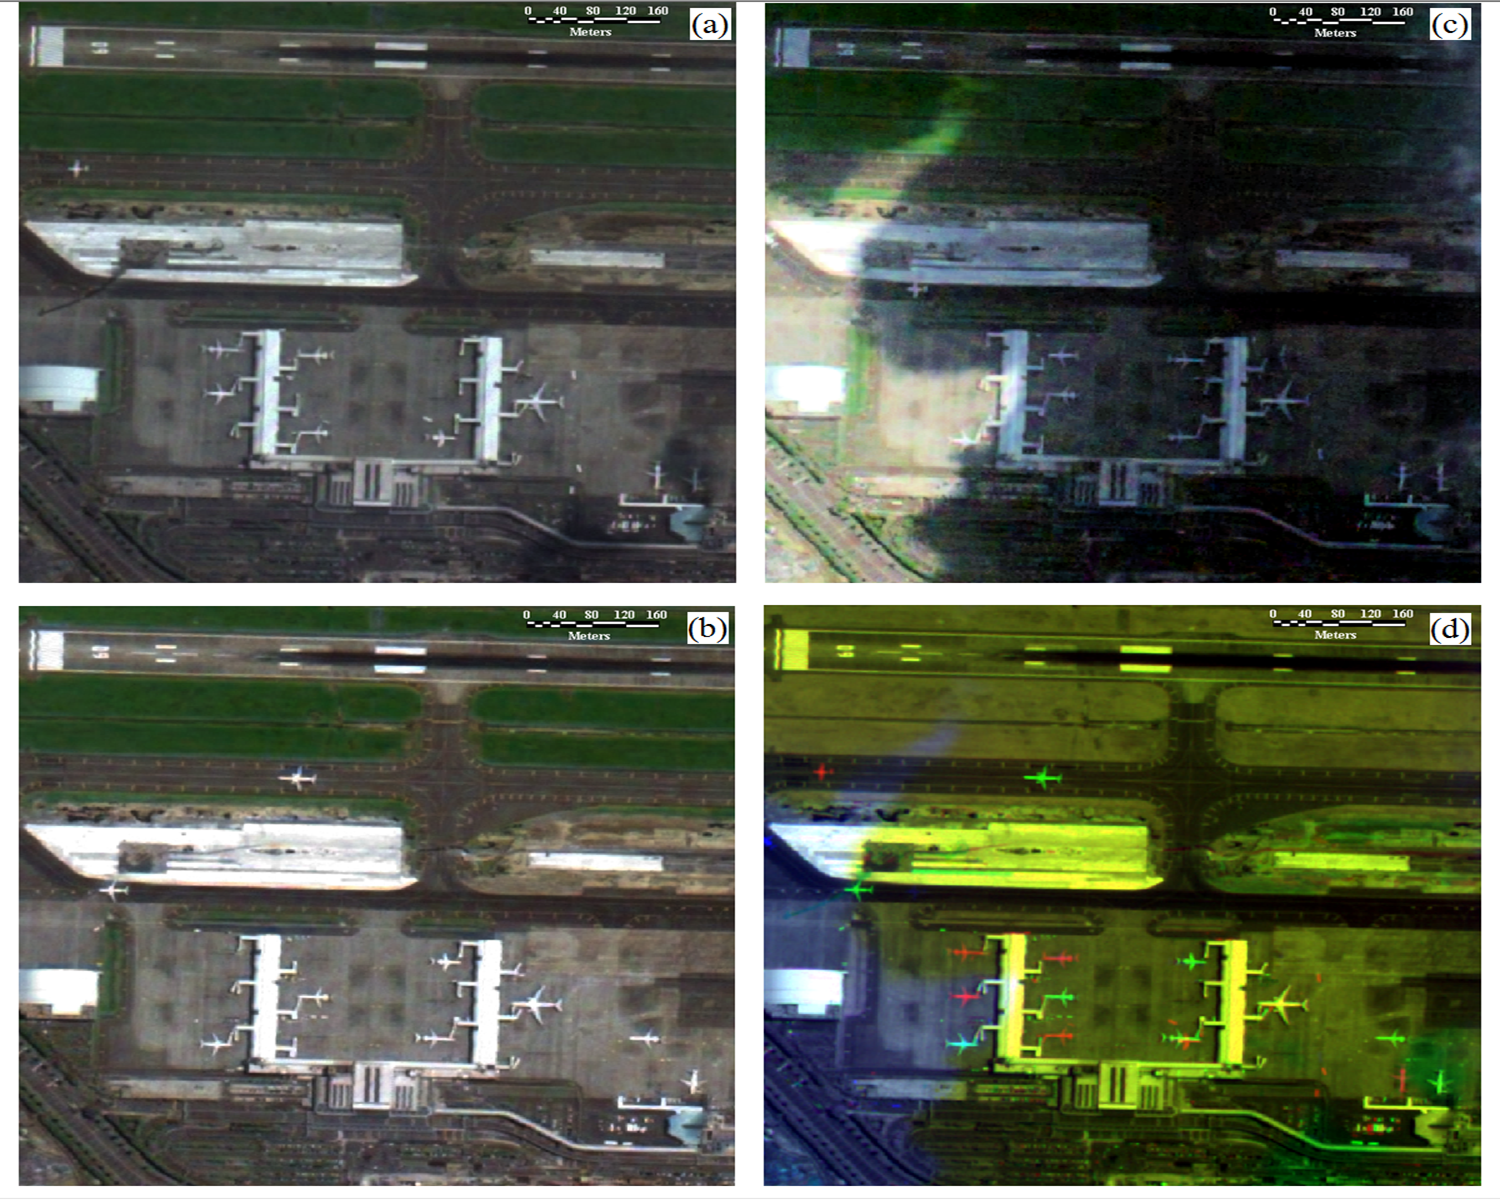 Example of site surveillance at Kaohsiung International Airport using daily revisit imagery taken by Formosat-2 on (a) 2 July 2005, (b) 3 July 2005, and (c) 4 July 2005, respectively. The color composite of red (pan band of July 2), green (pan band of July 3) and blue (pan band of July 4) is shown in (d). (Reprint from Liu 2006 IEEE TGRS)